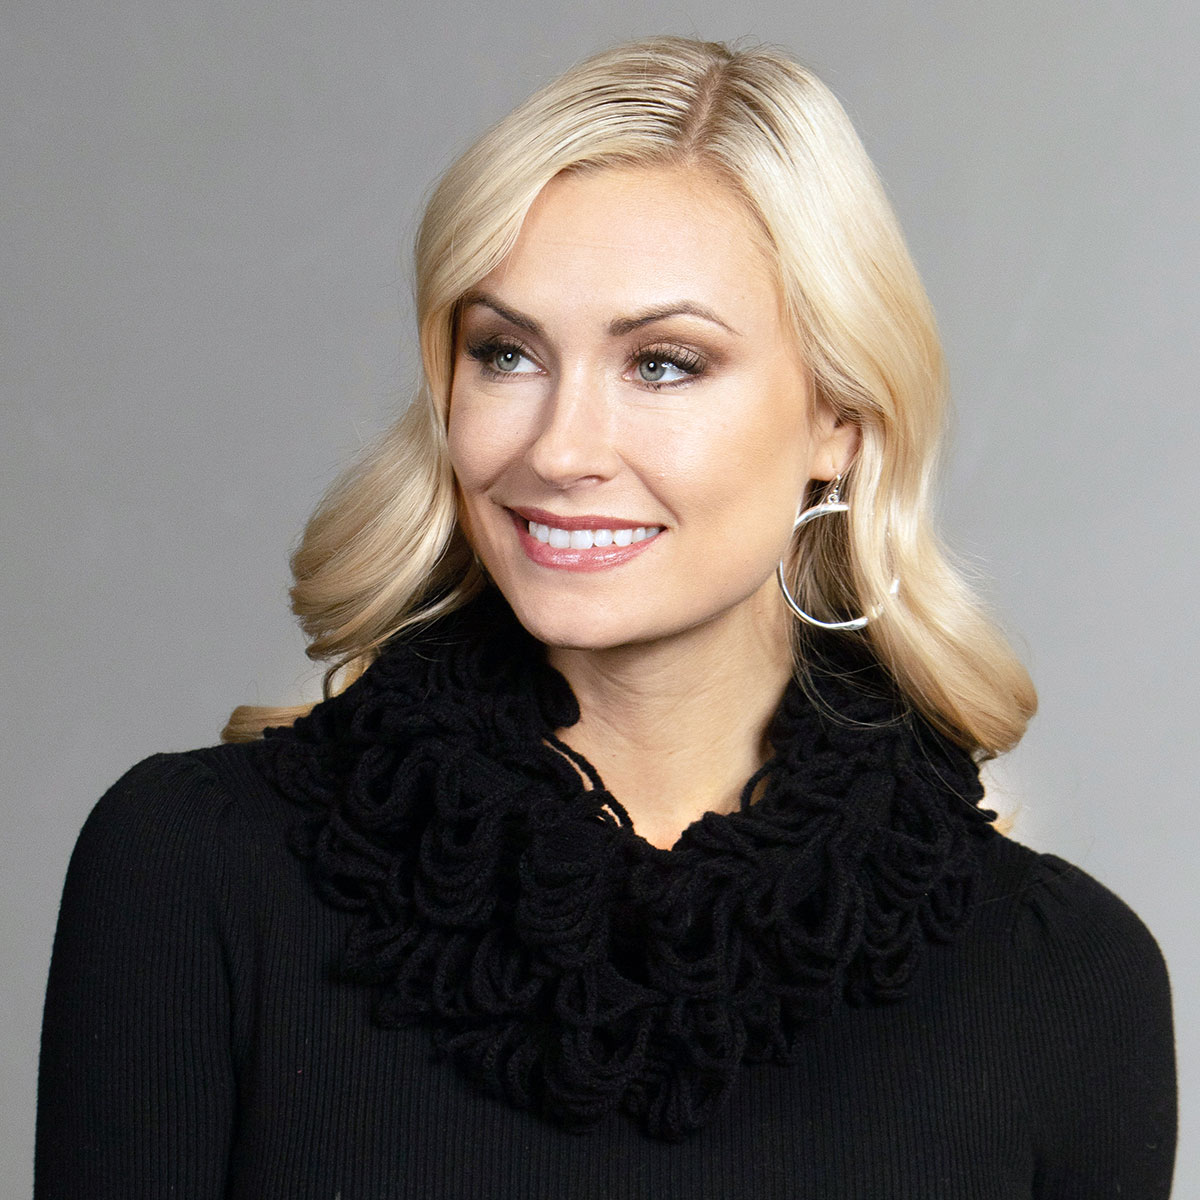 b70 INFINITY SCARF LOOPY BLACK 8IN X 52IN KNIT - Click Image to Close